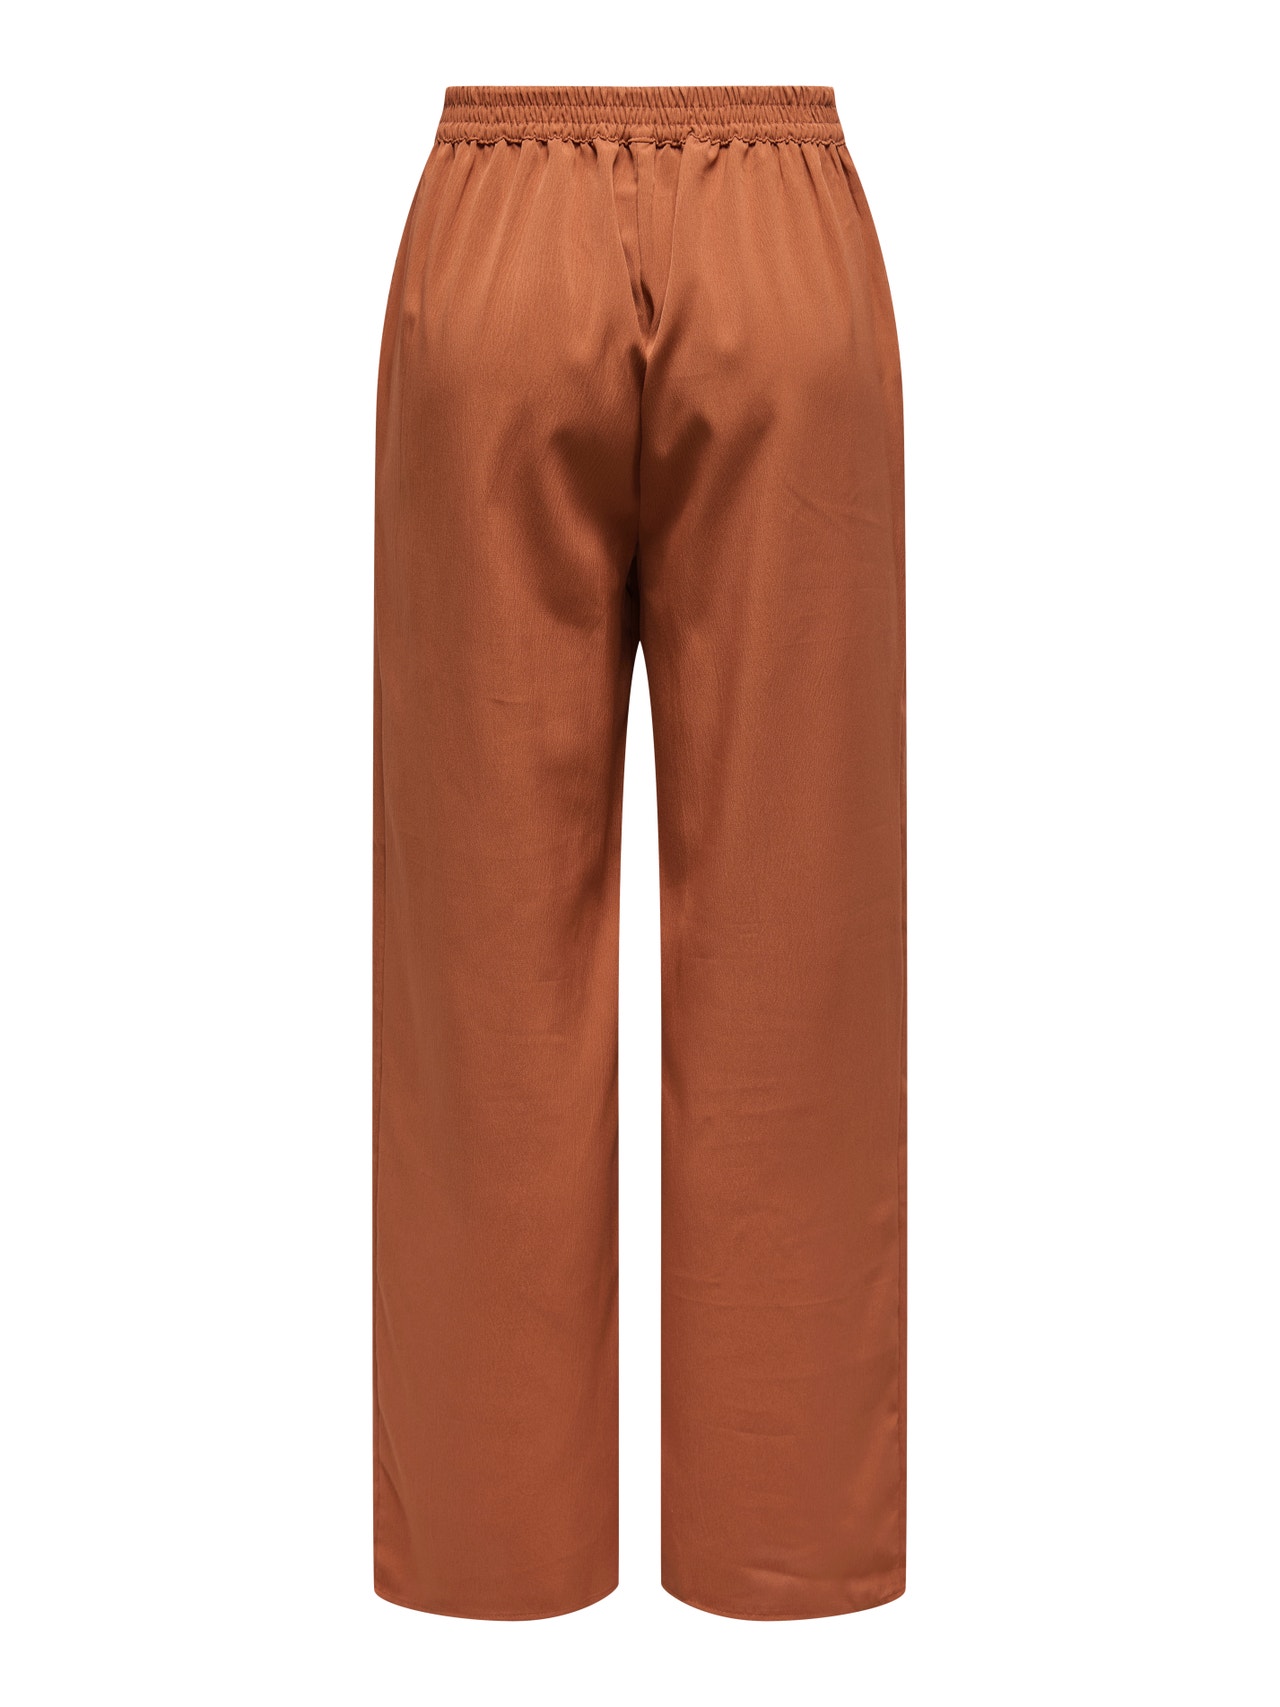 ONLY Trousers with tie belt -Mocha Bisque - 15335560